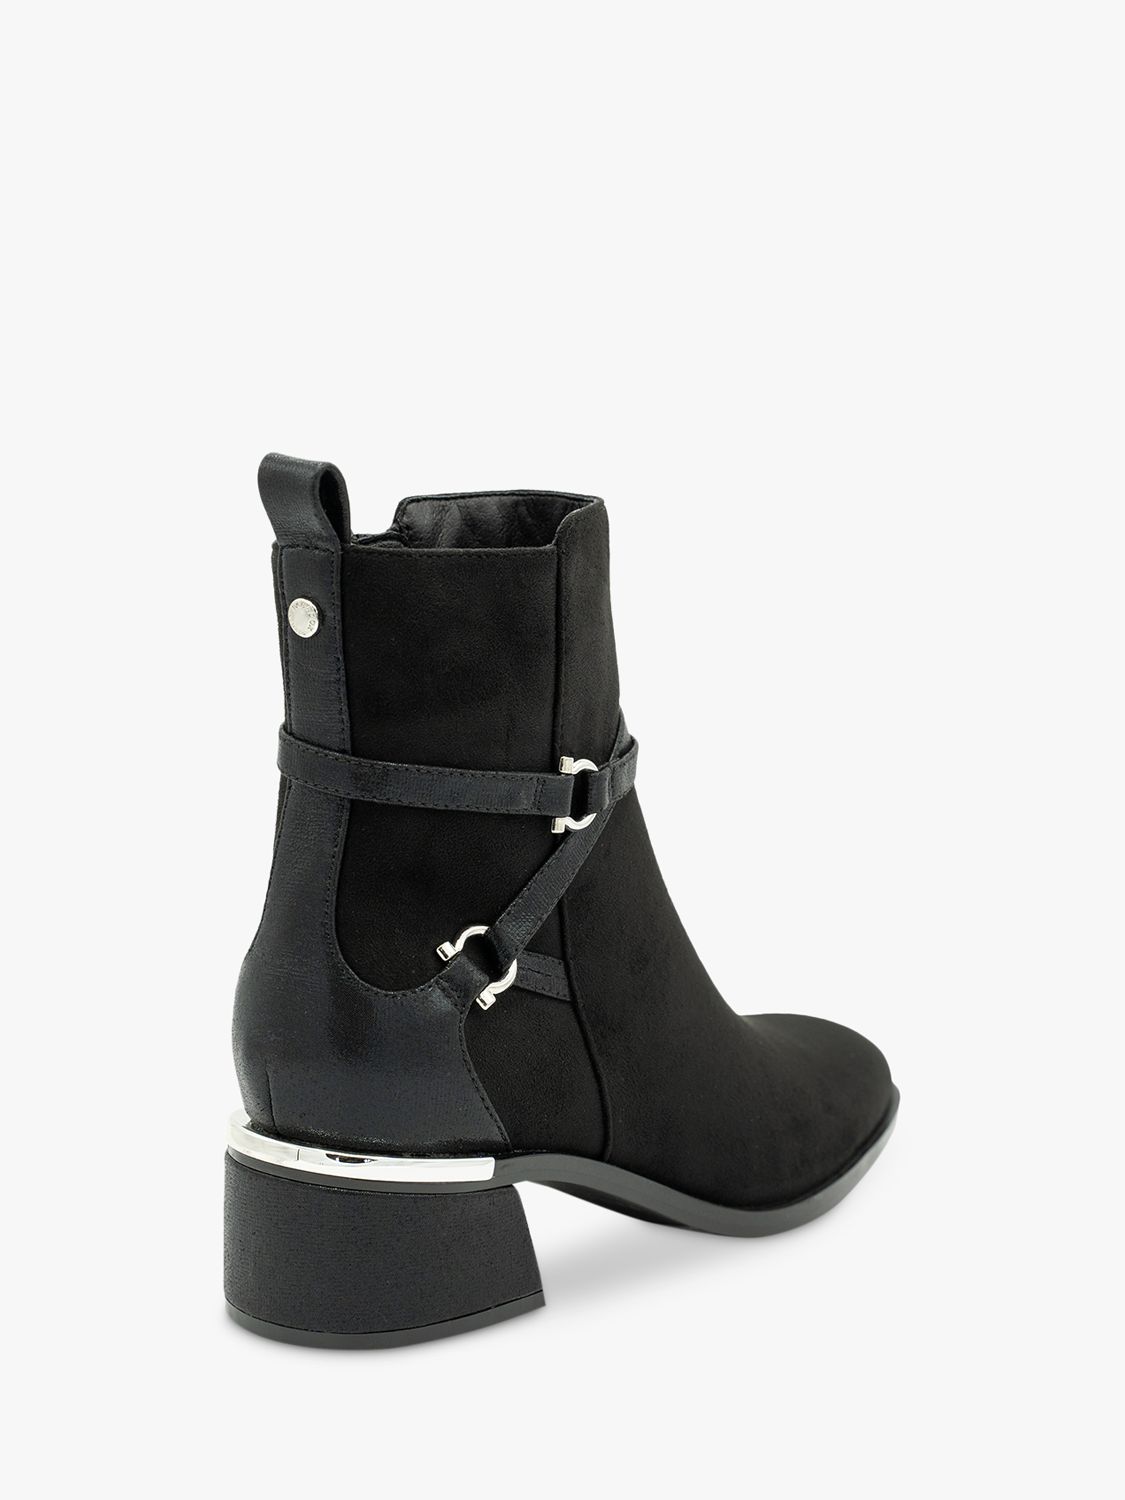 Paradox London Avalon Ankle Boots, Black at John Lewis & Partners